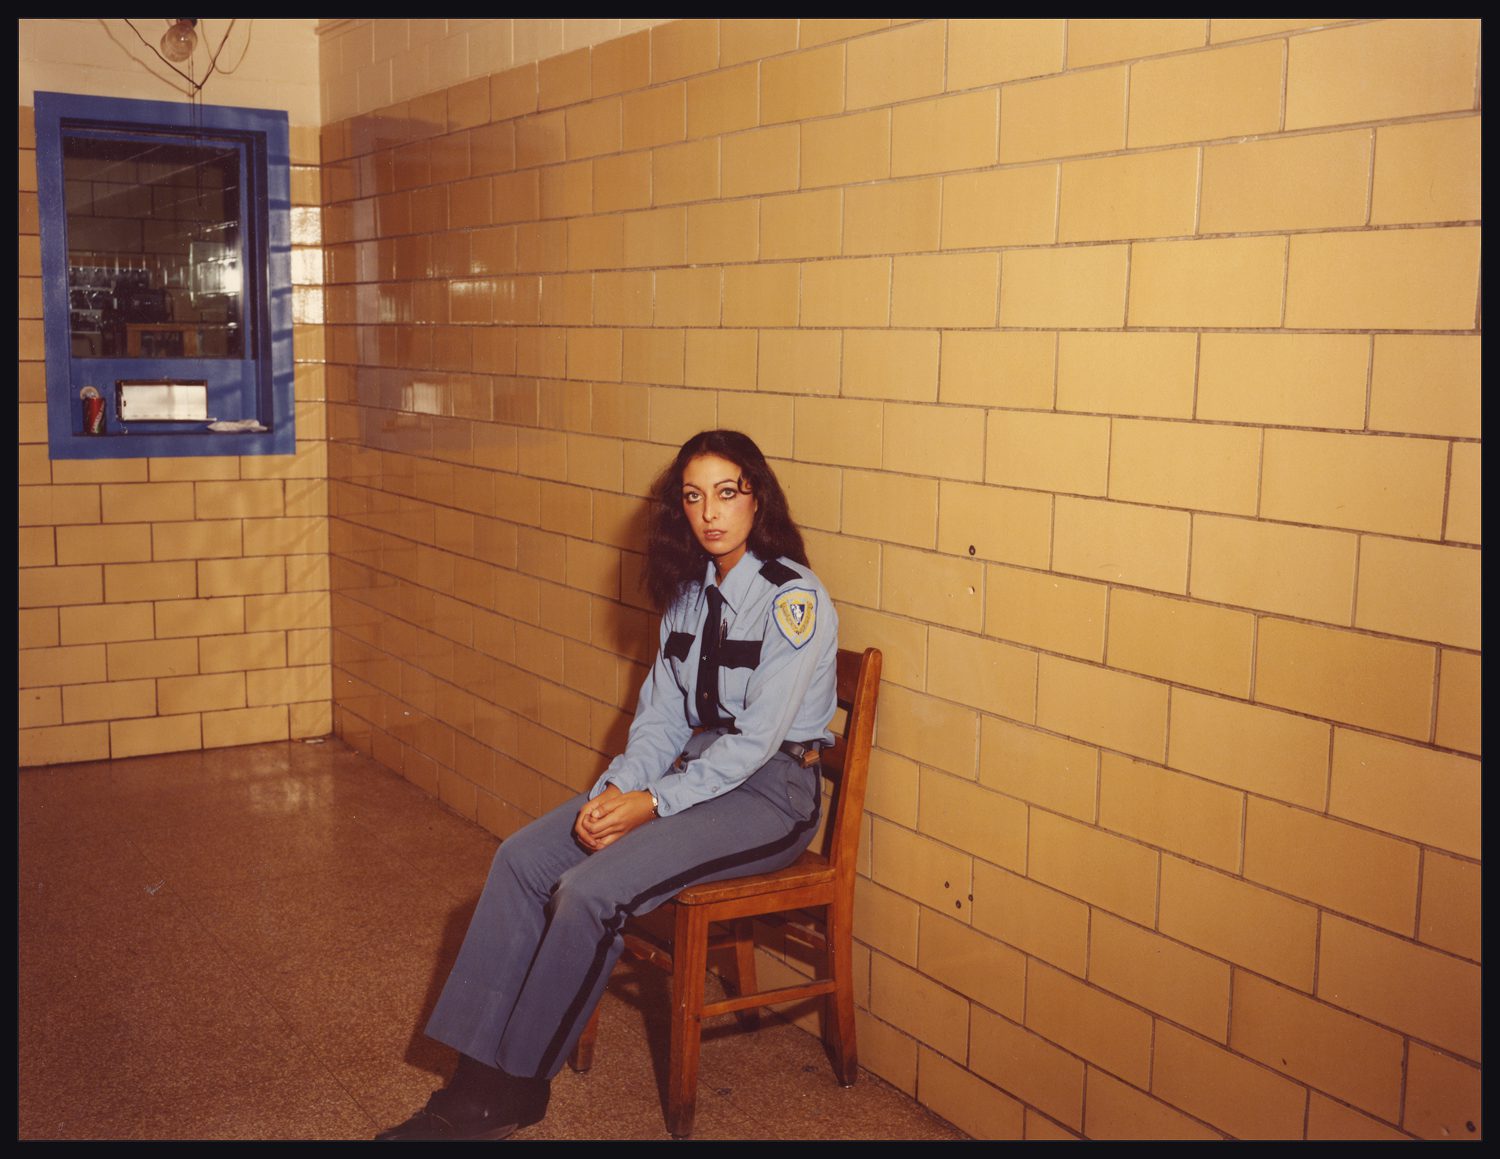 A woman in a guard uniform sits in a chair, against a faded yellow tile wall